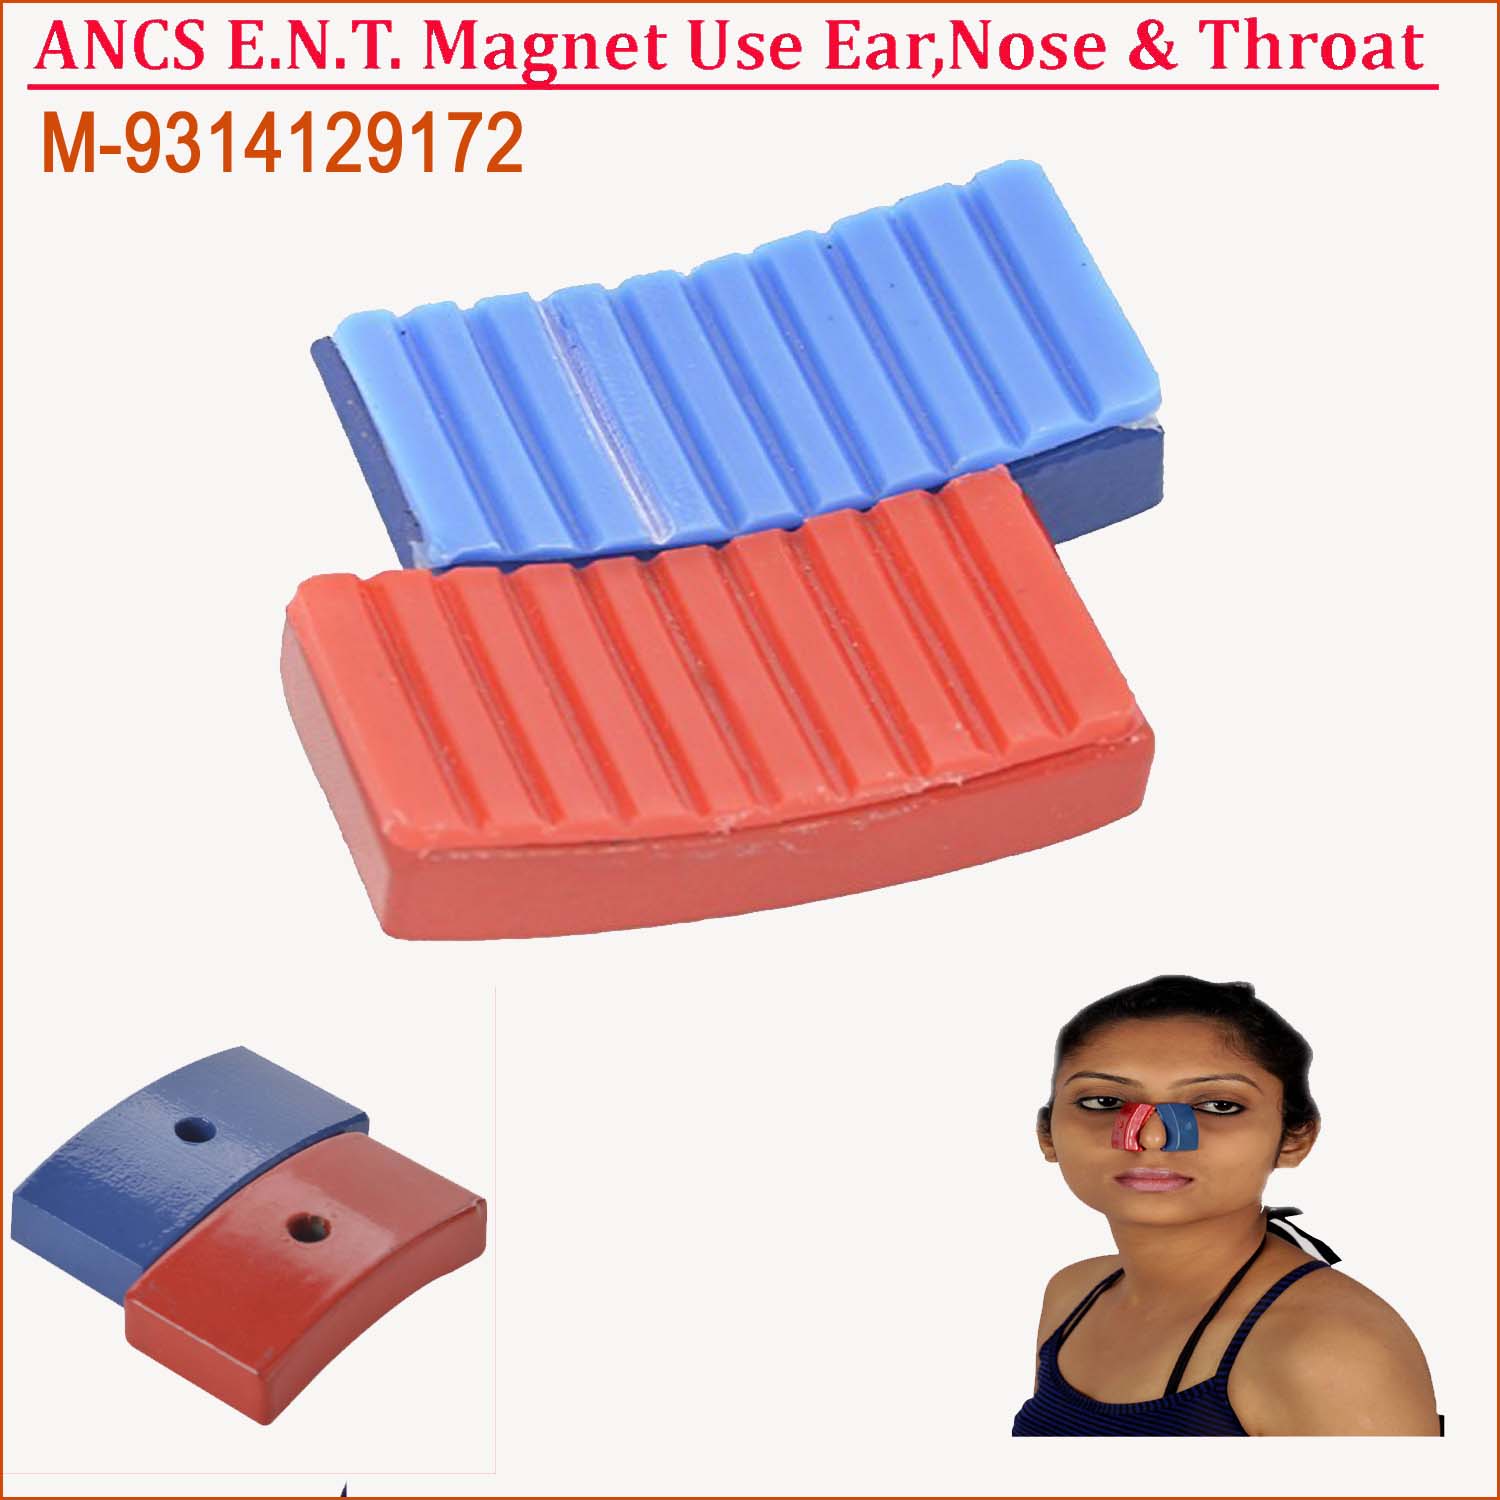 Ancs E.N.T. Magnets 2pc (Ear, Nose, Throat) 